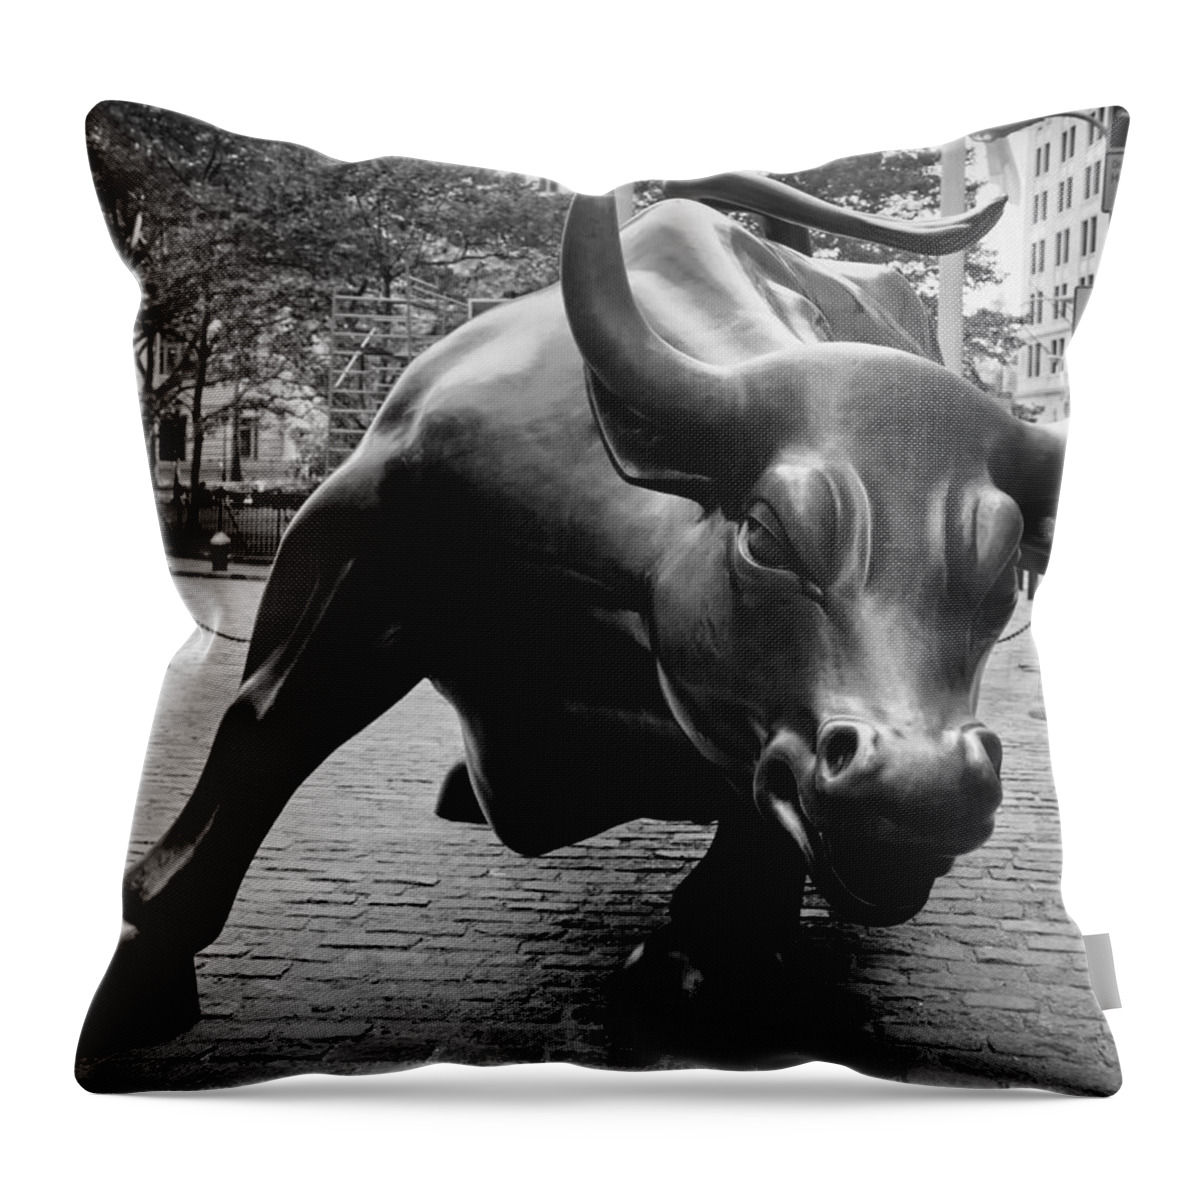 Wall Street Throw Pillow featuring the photograph The Wall Street Bull by Mountain Dreams